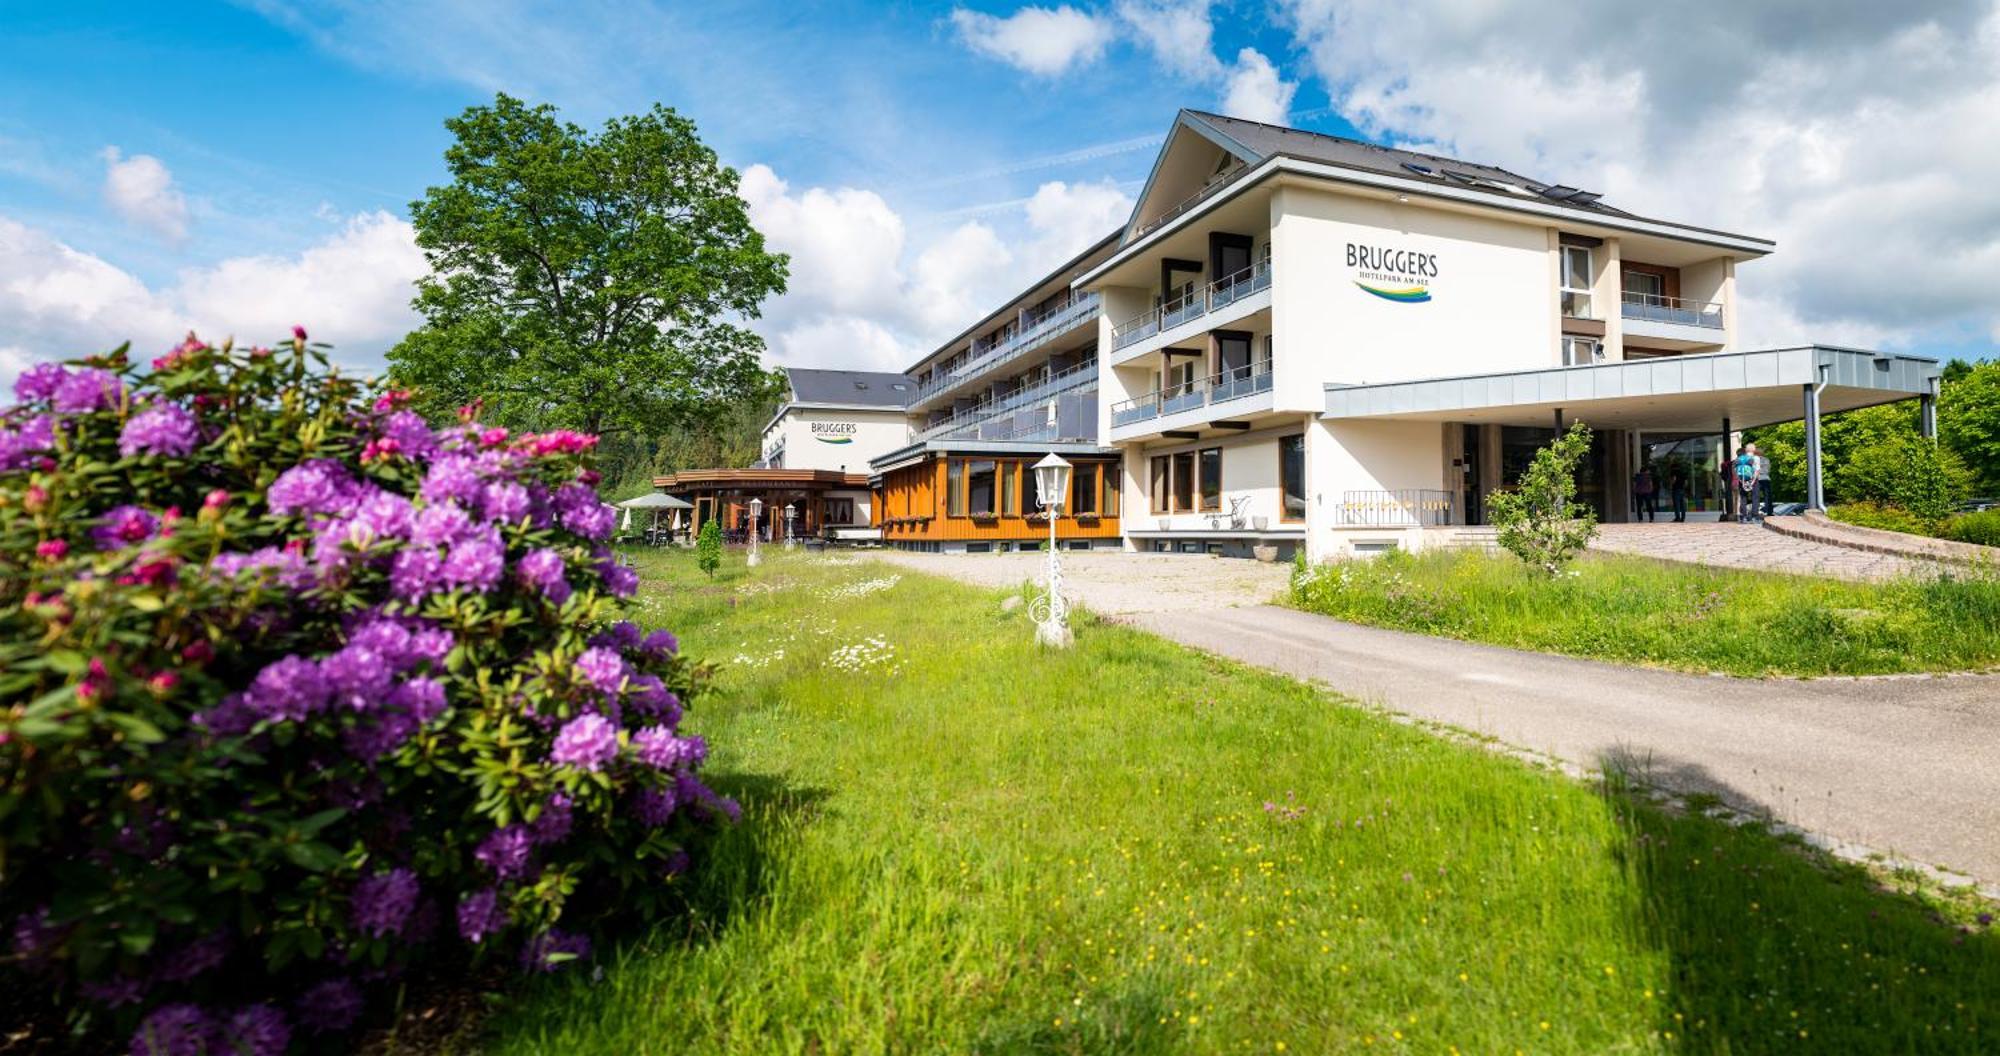 Brugger' S Hotelpark Am Titisee 외부 사진